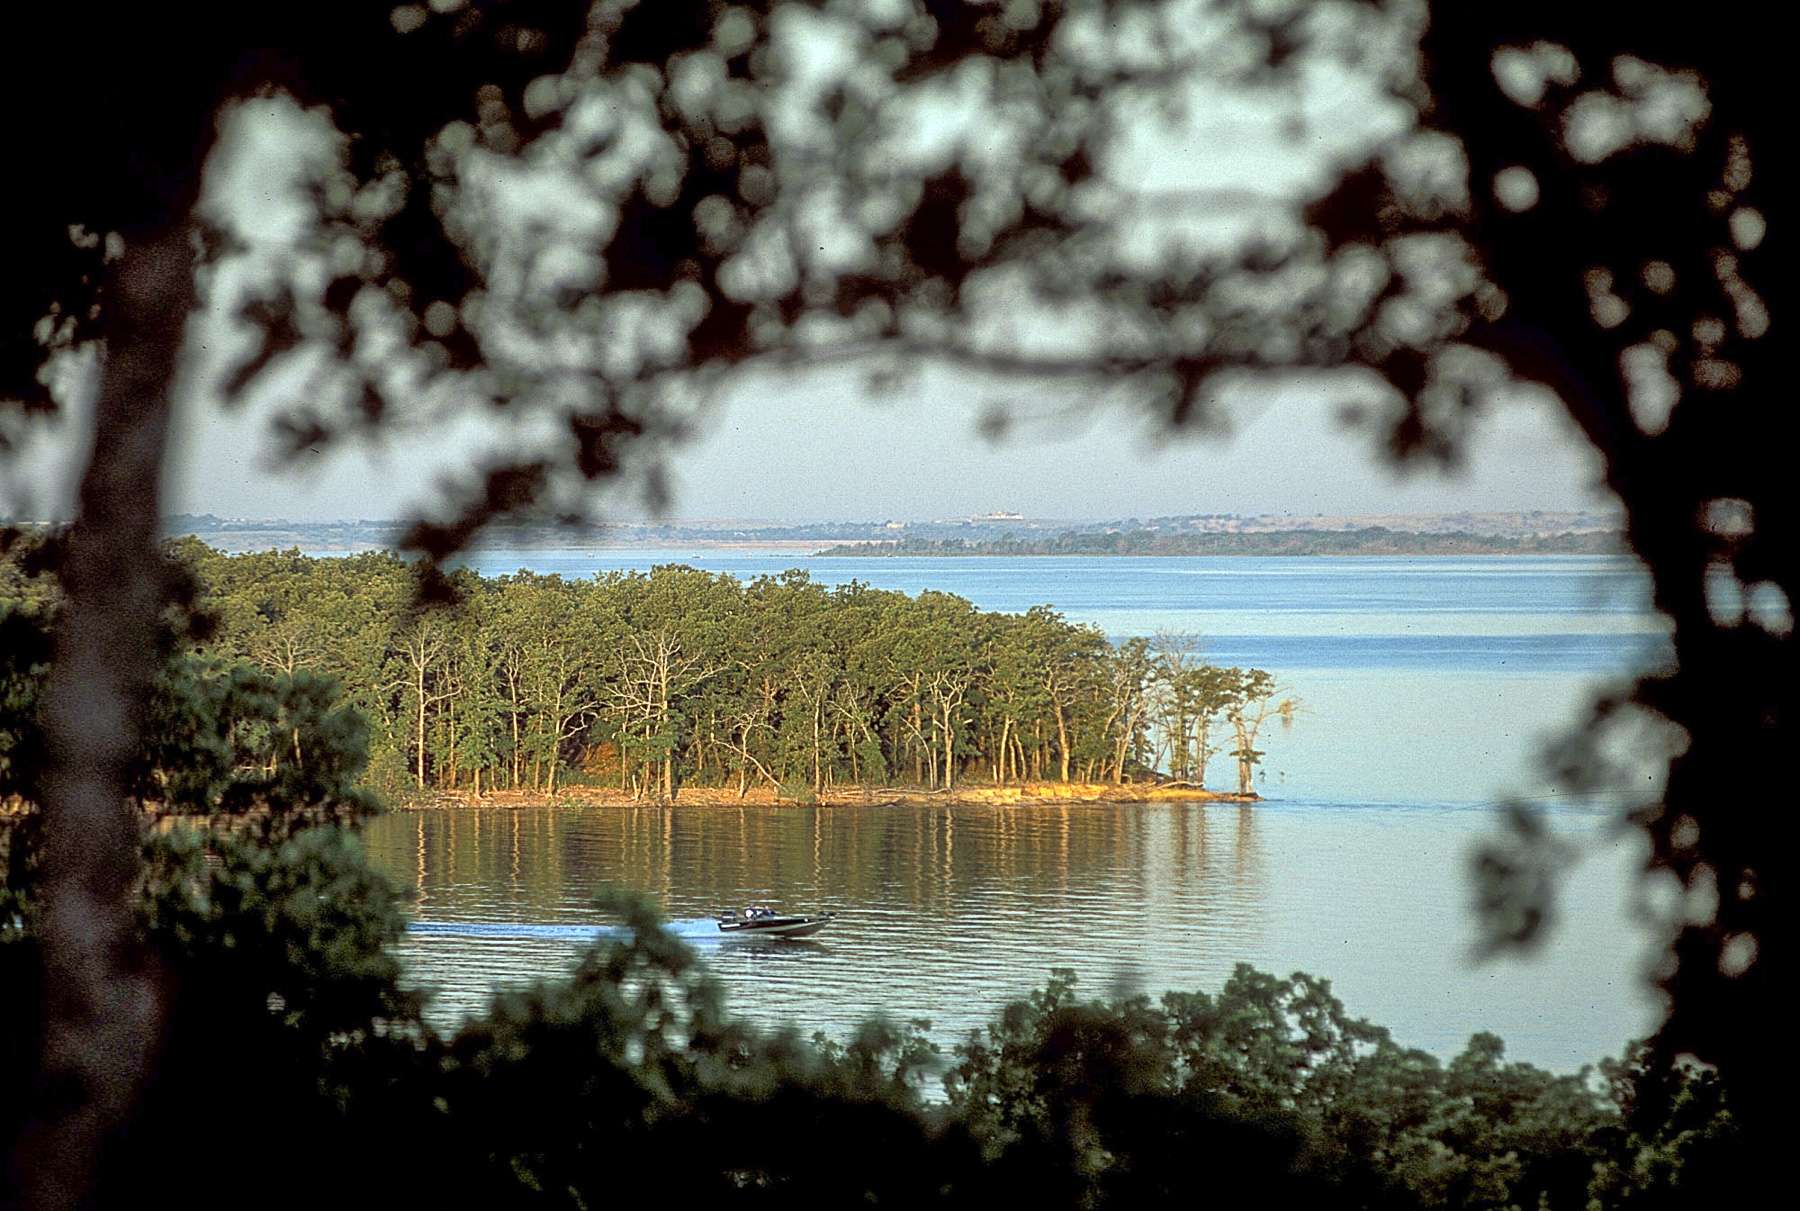 <h4>8. Lake Ray Roberts, Texas</h4>
 [29,350 acres] If you show up for a tournament on this lake, you best bring your A game because it takes big weights to win. Take the Bass Champs stop on April 1, for instance, during which eight 20-pound sacks were brought to the scales. And if you didnât have 18 pounds, you wouldnât even make the Top 20. The winner put together 24.05 pounds, and the weigh-in included five fish topping 7 pounds, with a 10.22-pounder taking big-bass honors. Also, a USA Fishing Trails event in March was won with 23.82, while second was nabbed with 22.04.
